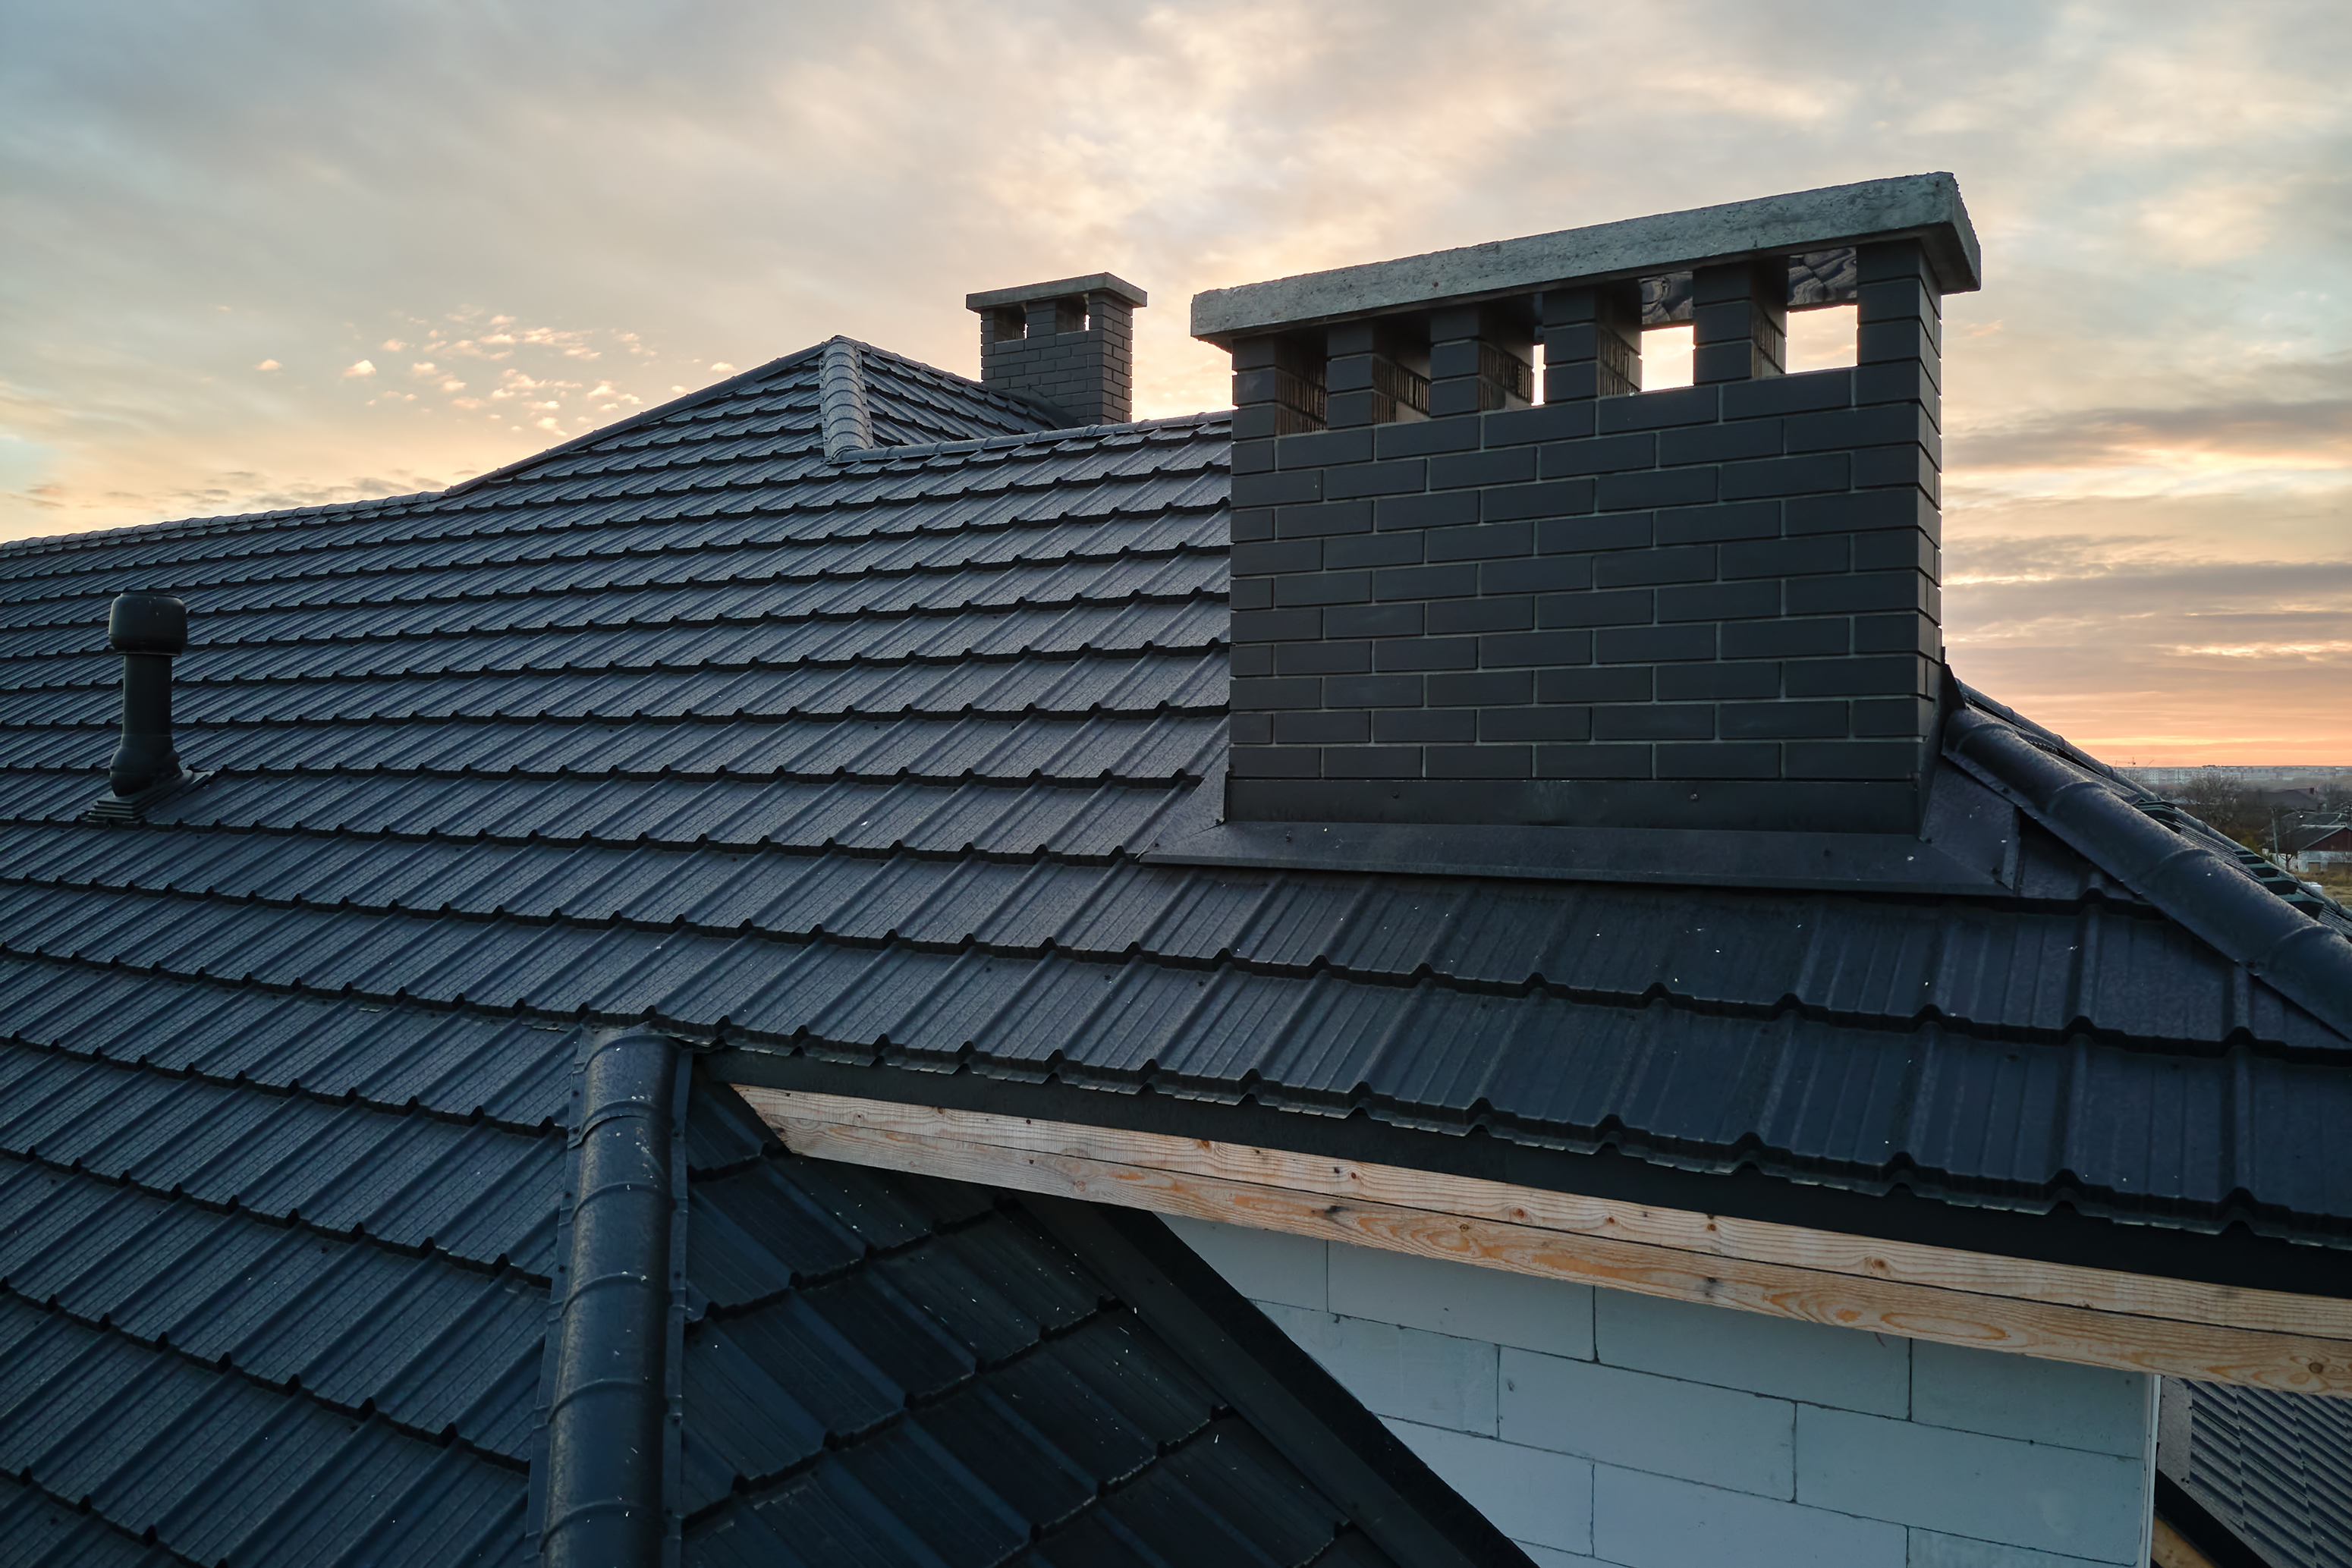 Top 10 Signs Your Roof Needs Repair: Red Flags You Shouldn't Ignore